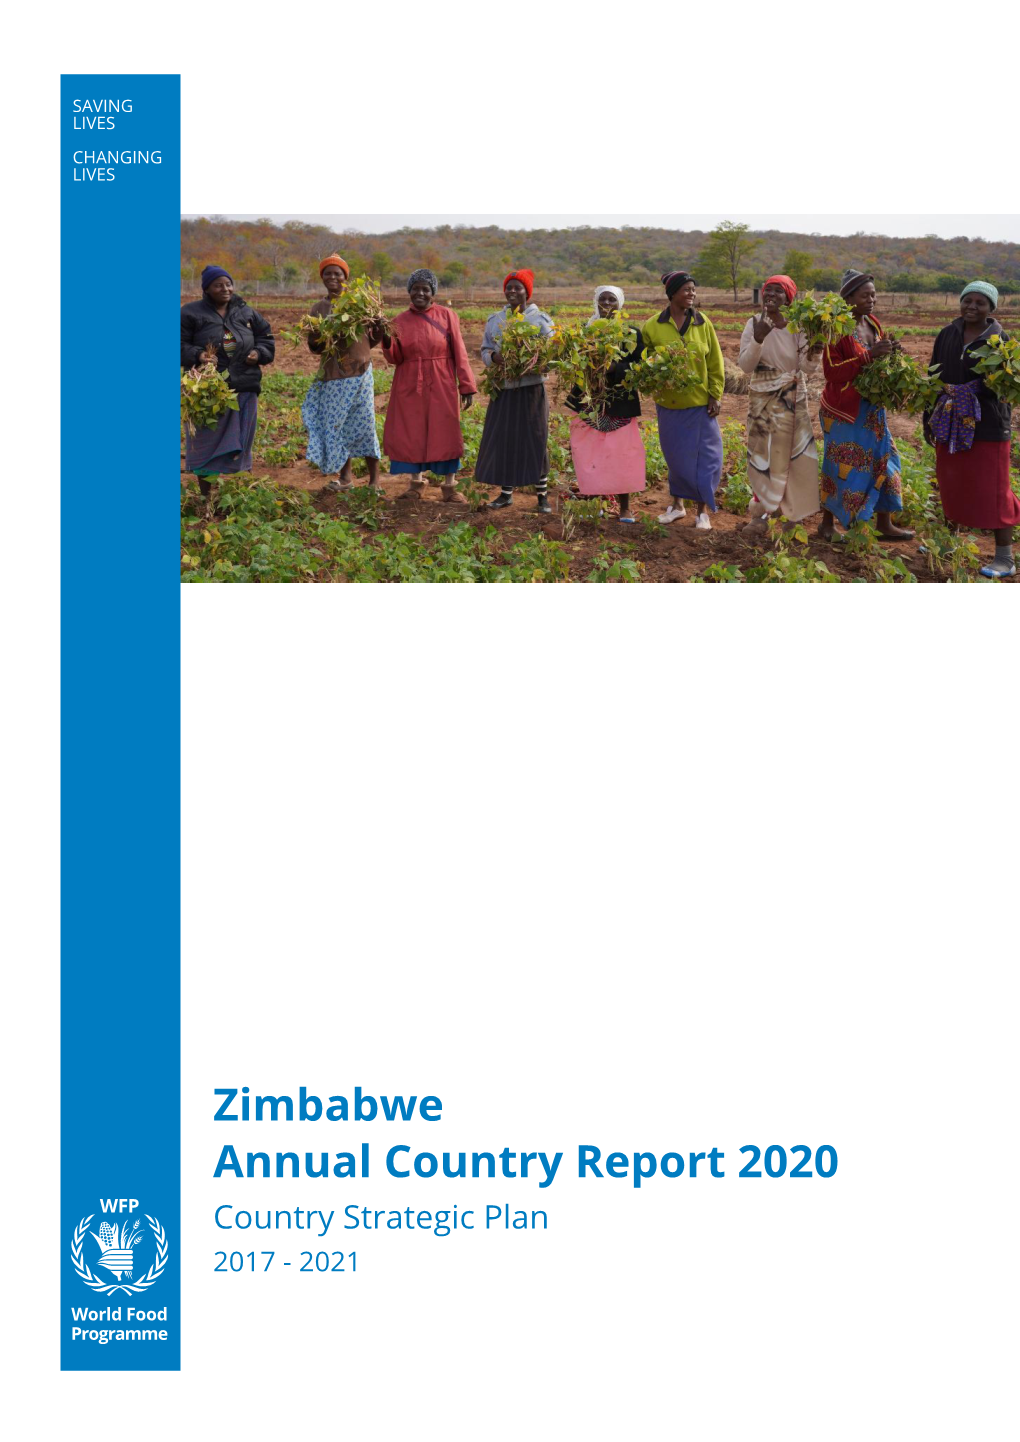 Zimbabwe Annual Country Report 2020 Country Strategic Plan 2017 - 2021 Table of Contents